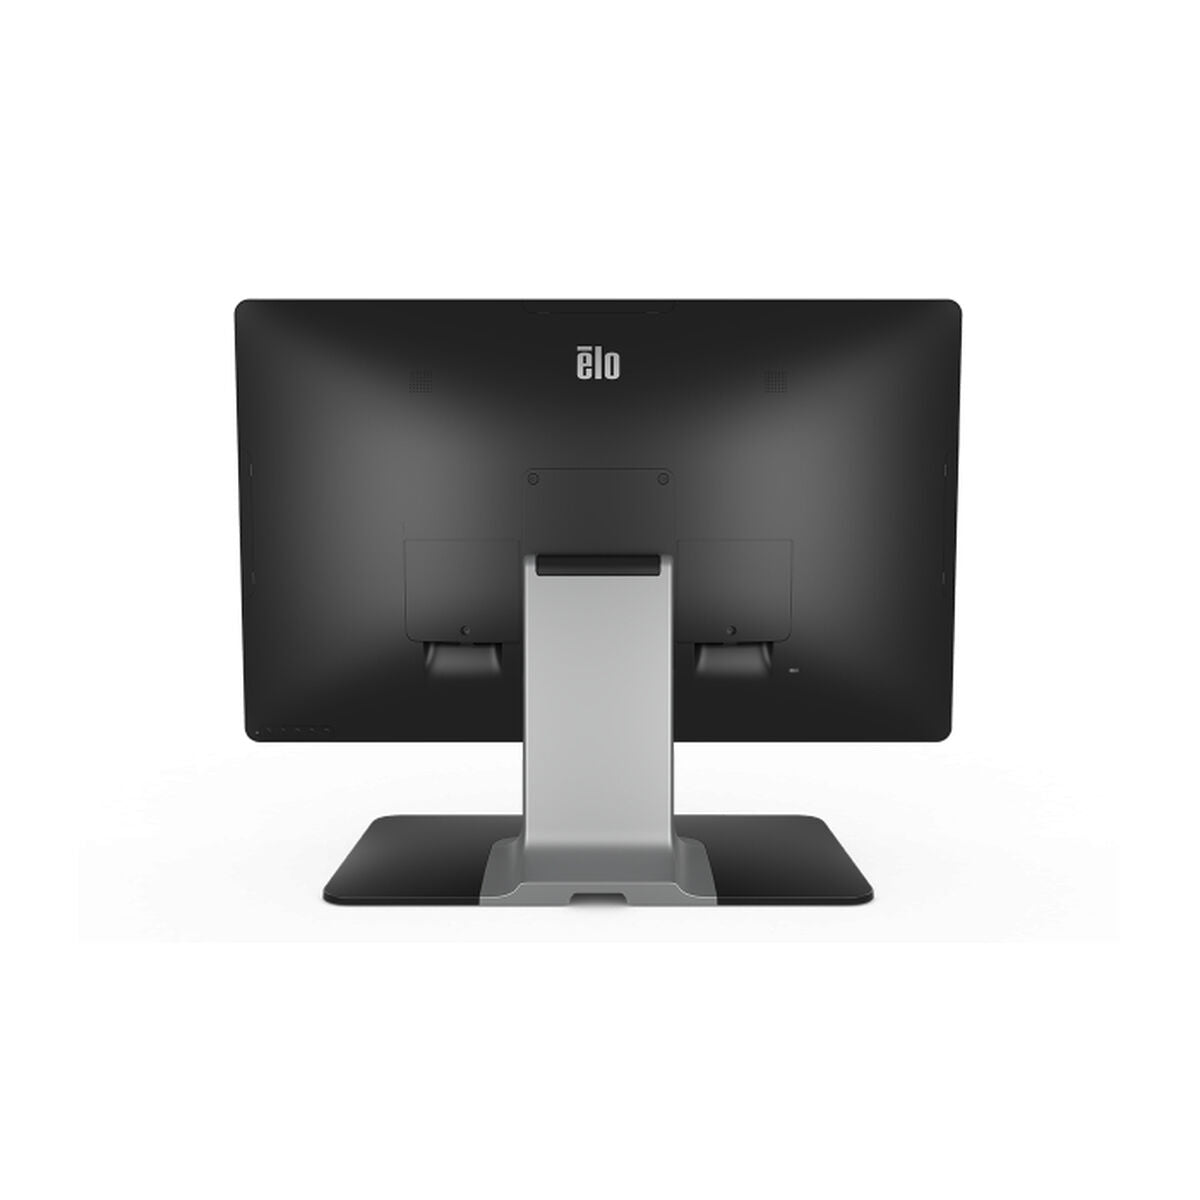 Monitor Elo Touch Systems E351806 23,8" 60 Hz 50-60 Hz, Elo Touch Systems, Computing, monitor-elo-touch-systems-e351806-23-8-tft-lcd-60-hz-50-60-hz, Brand_Elo Touch Systems, category-reference-2609, category-reference-2642, category-reference-2644, category-reference-t-19685, computers / peripherals, Condition_NEW, office, Price_600 - 700, Teleworking, RiotNook